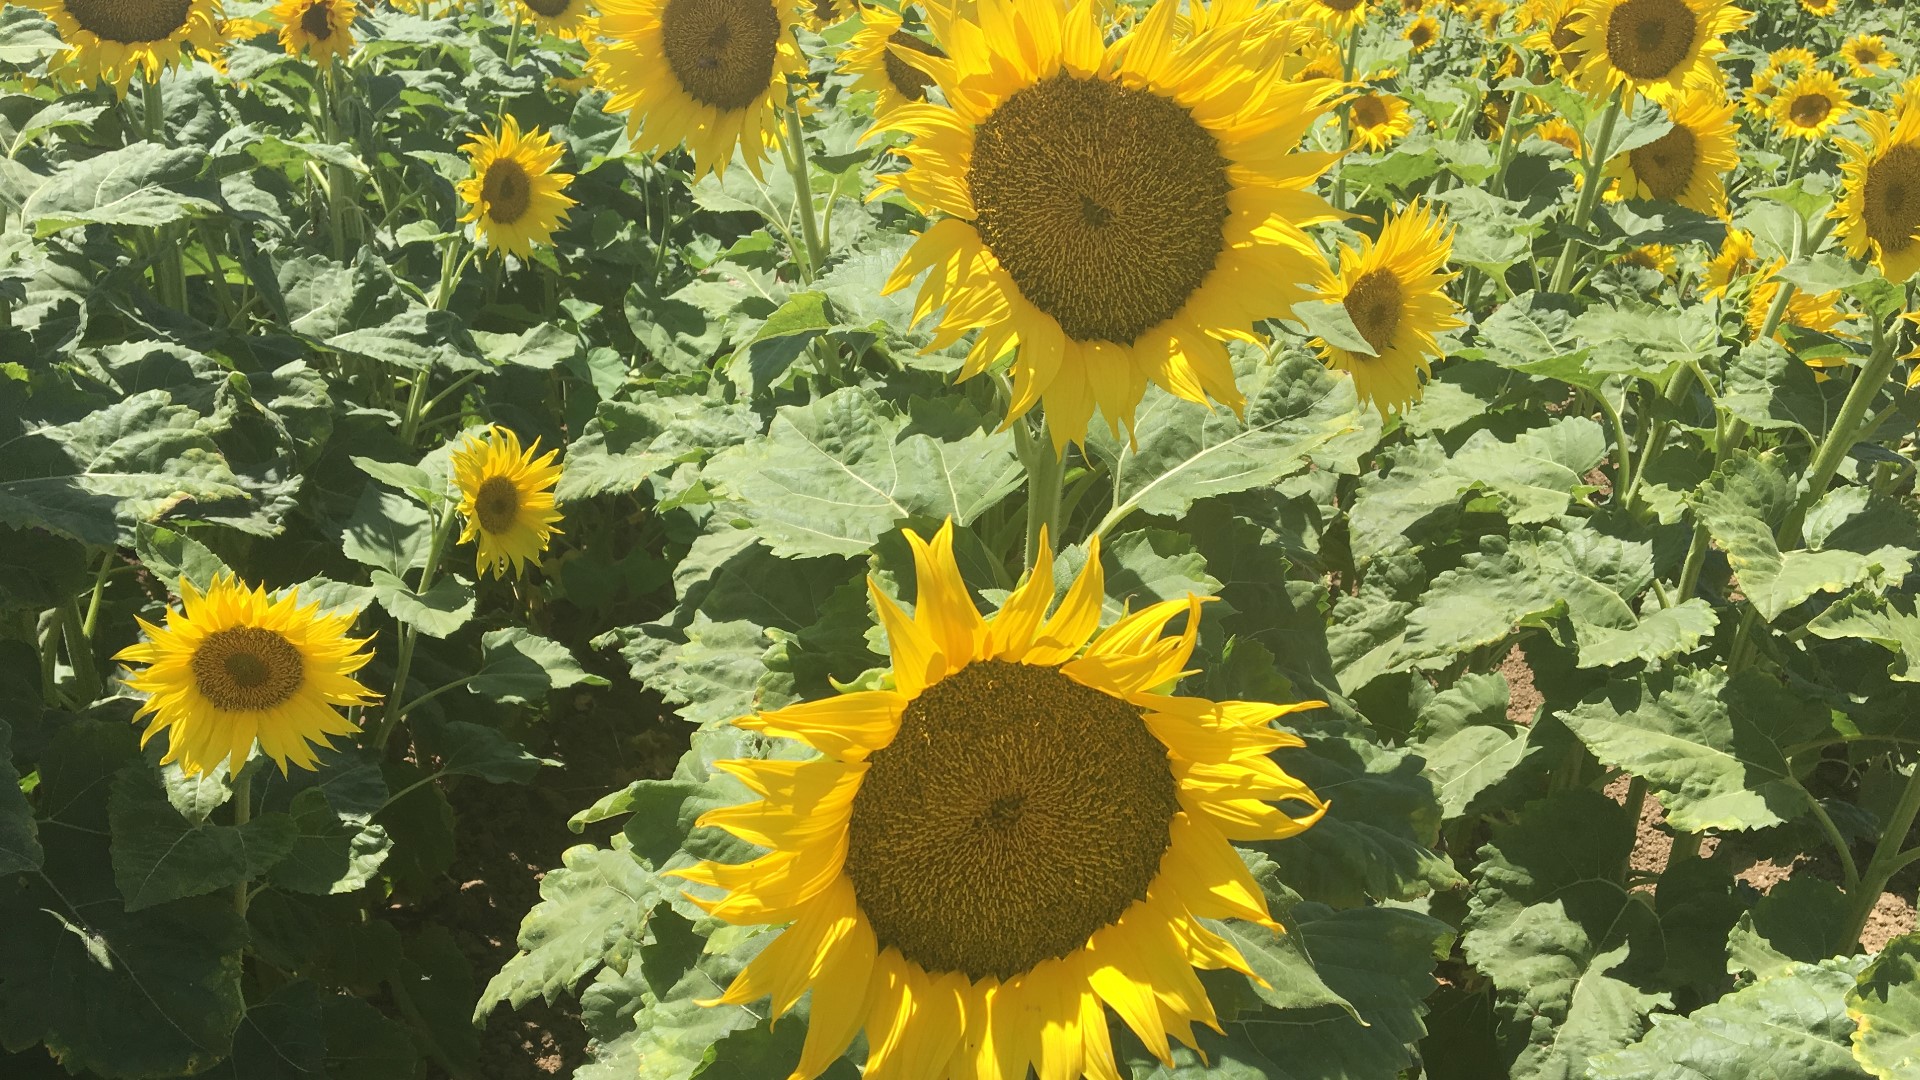 Sunflower Selfie Takers Are Driving Solano County Farmers Crazy